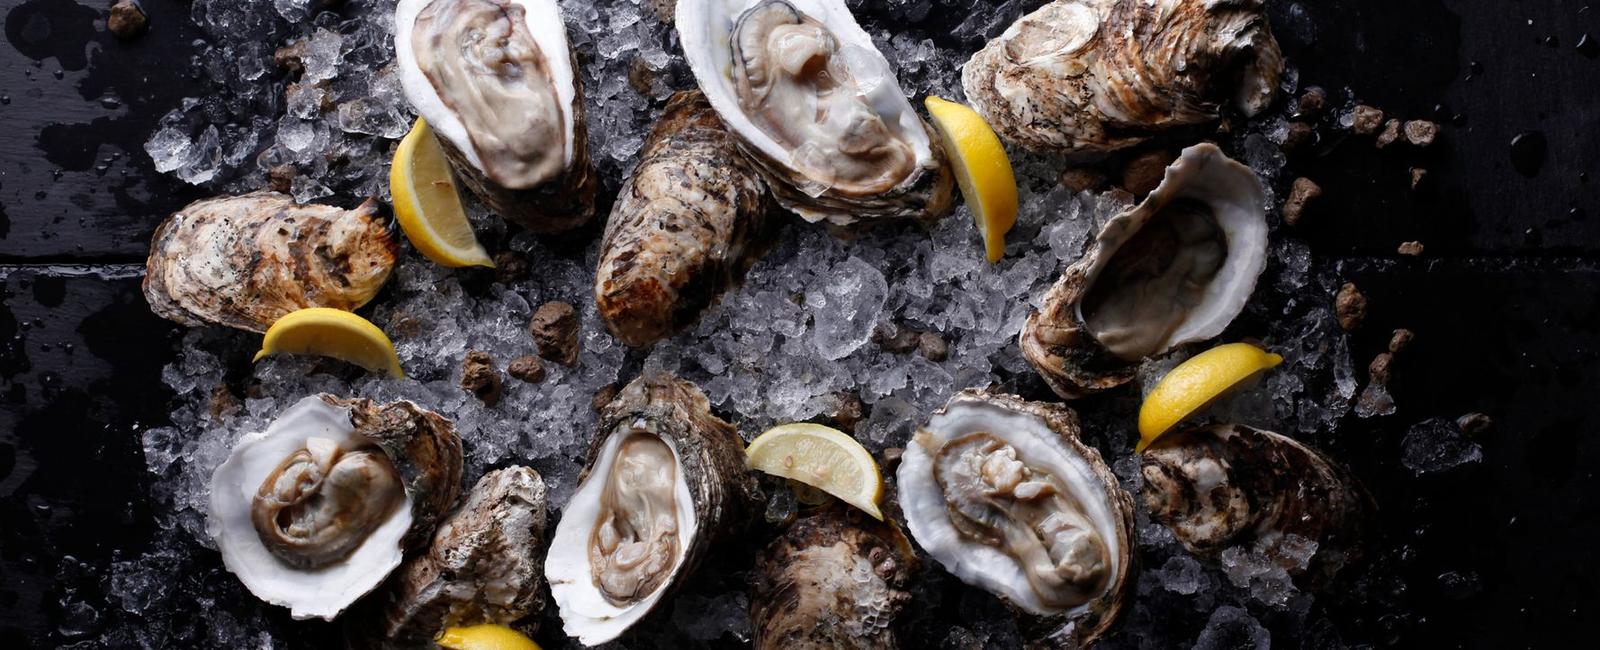 A raw oyster is still likely alive when you eat it